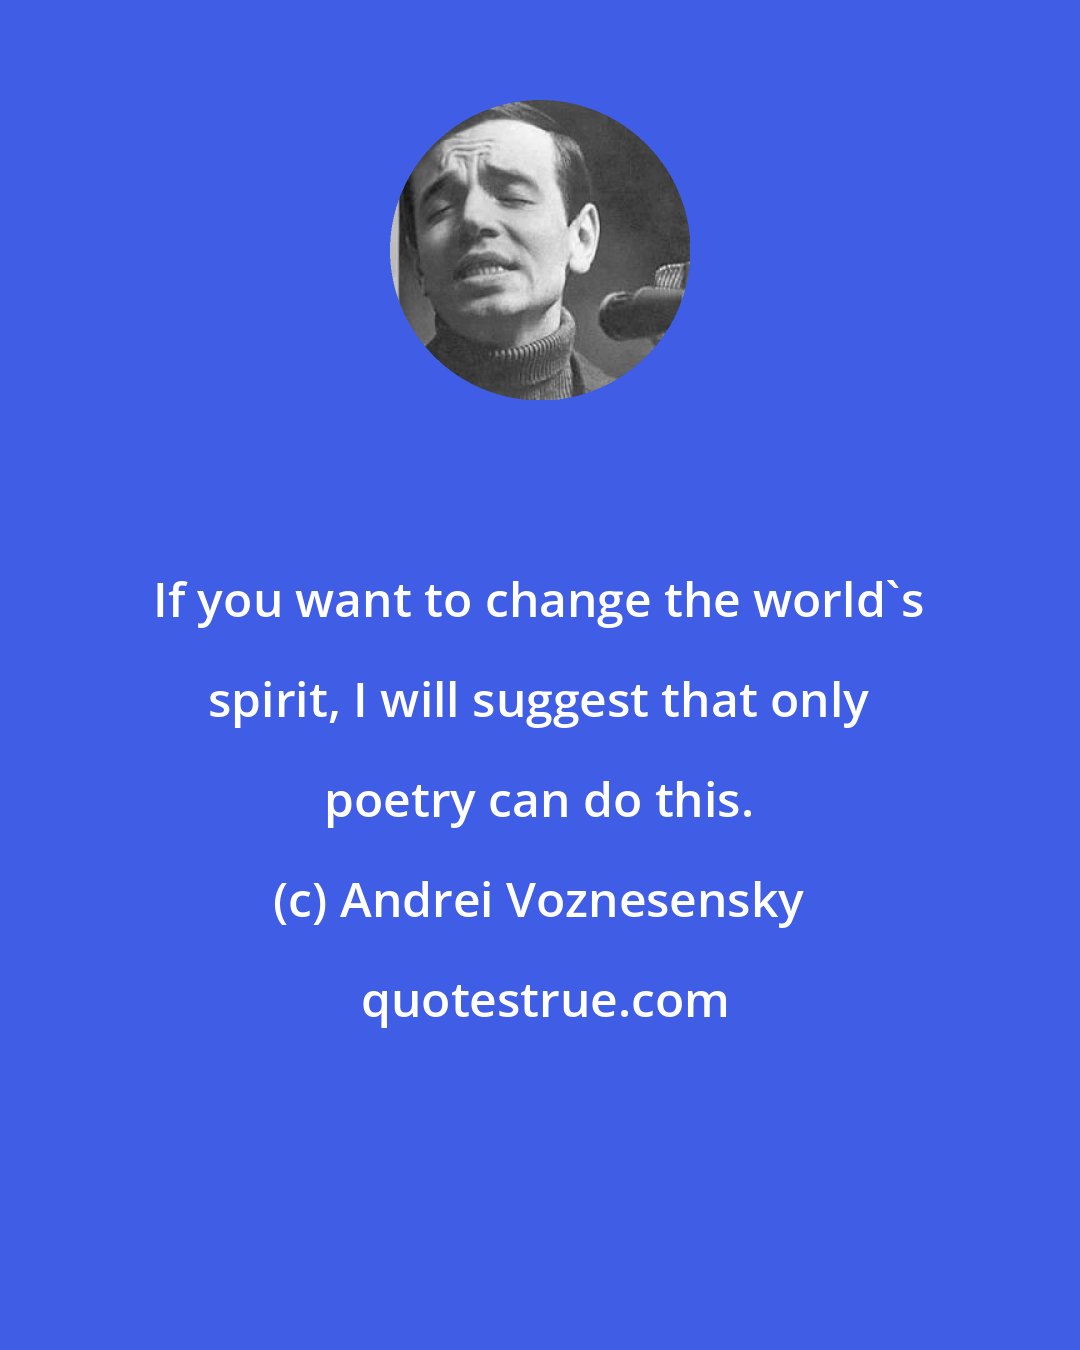 Andrei Voznesensky: If you want to change the world's spirit, I will suggest that only poetry can do this.